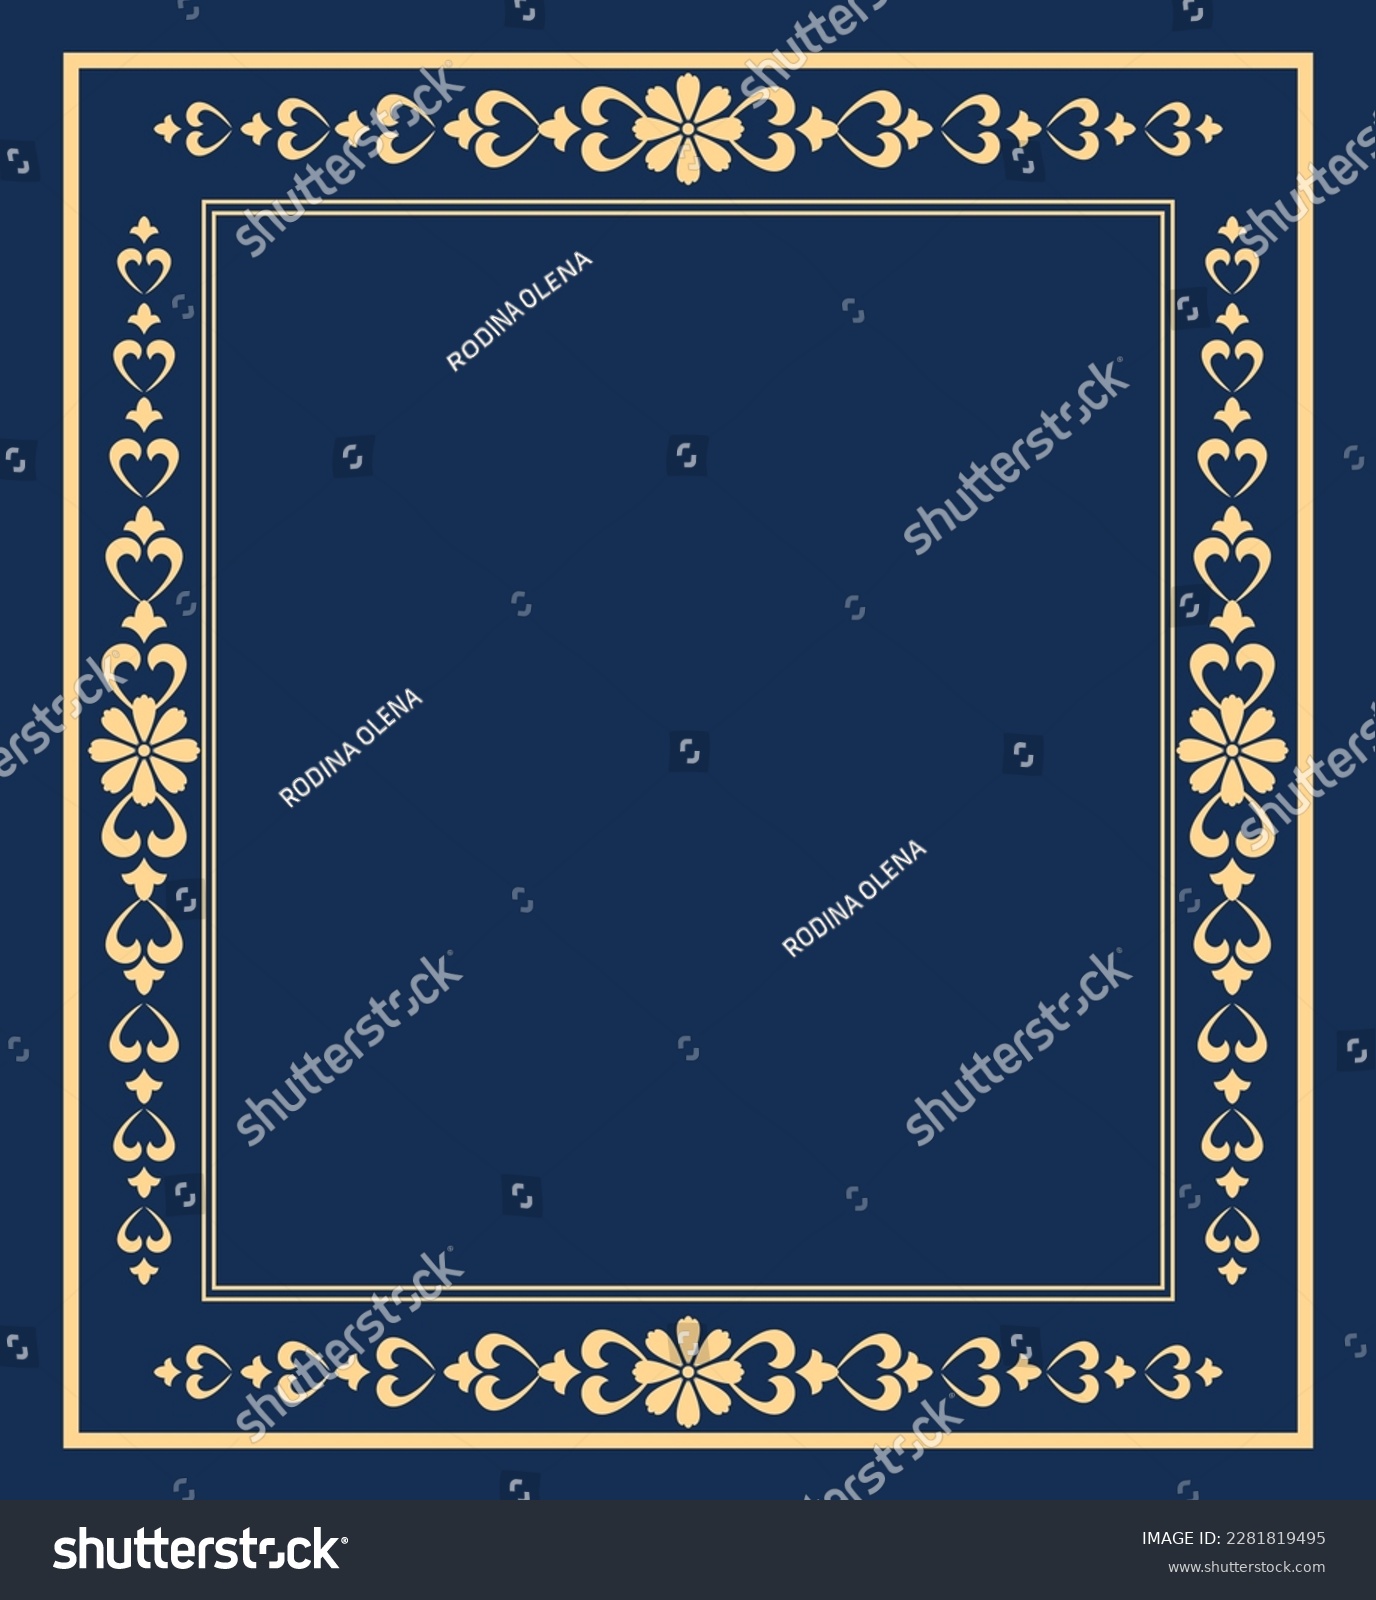 SVG of Decorative frame Elegant vector element for design in Eastern style, place for text. Floral golden and dark blue border. Lace illustration for invitations and greeting cards svg